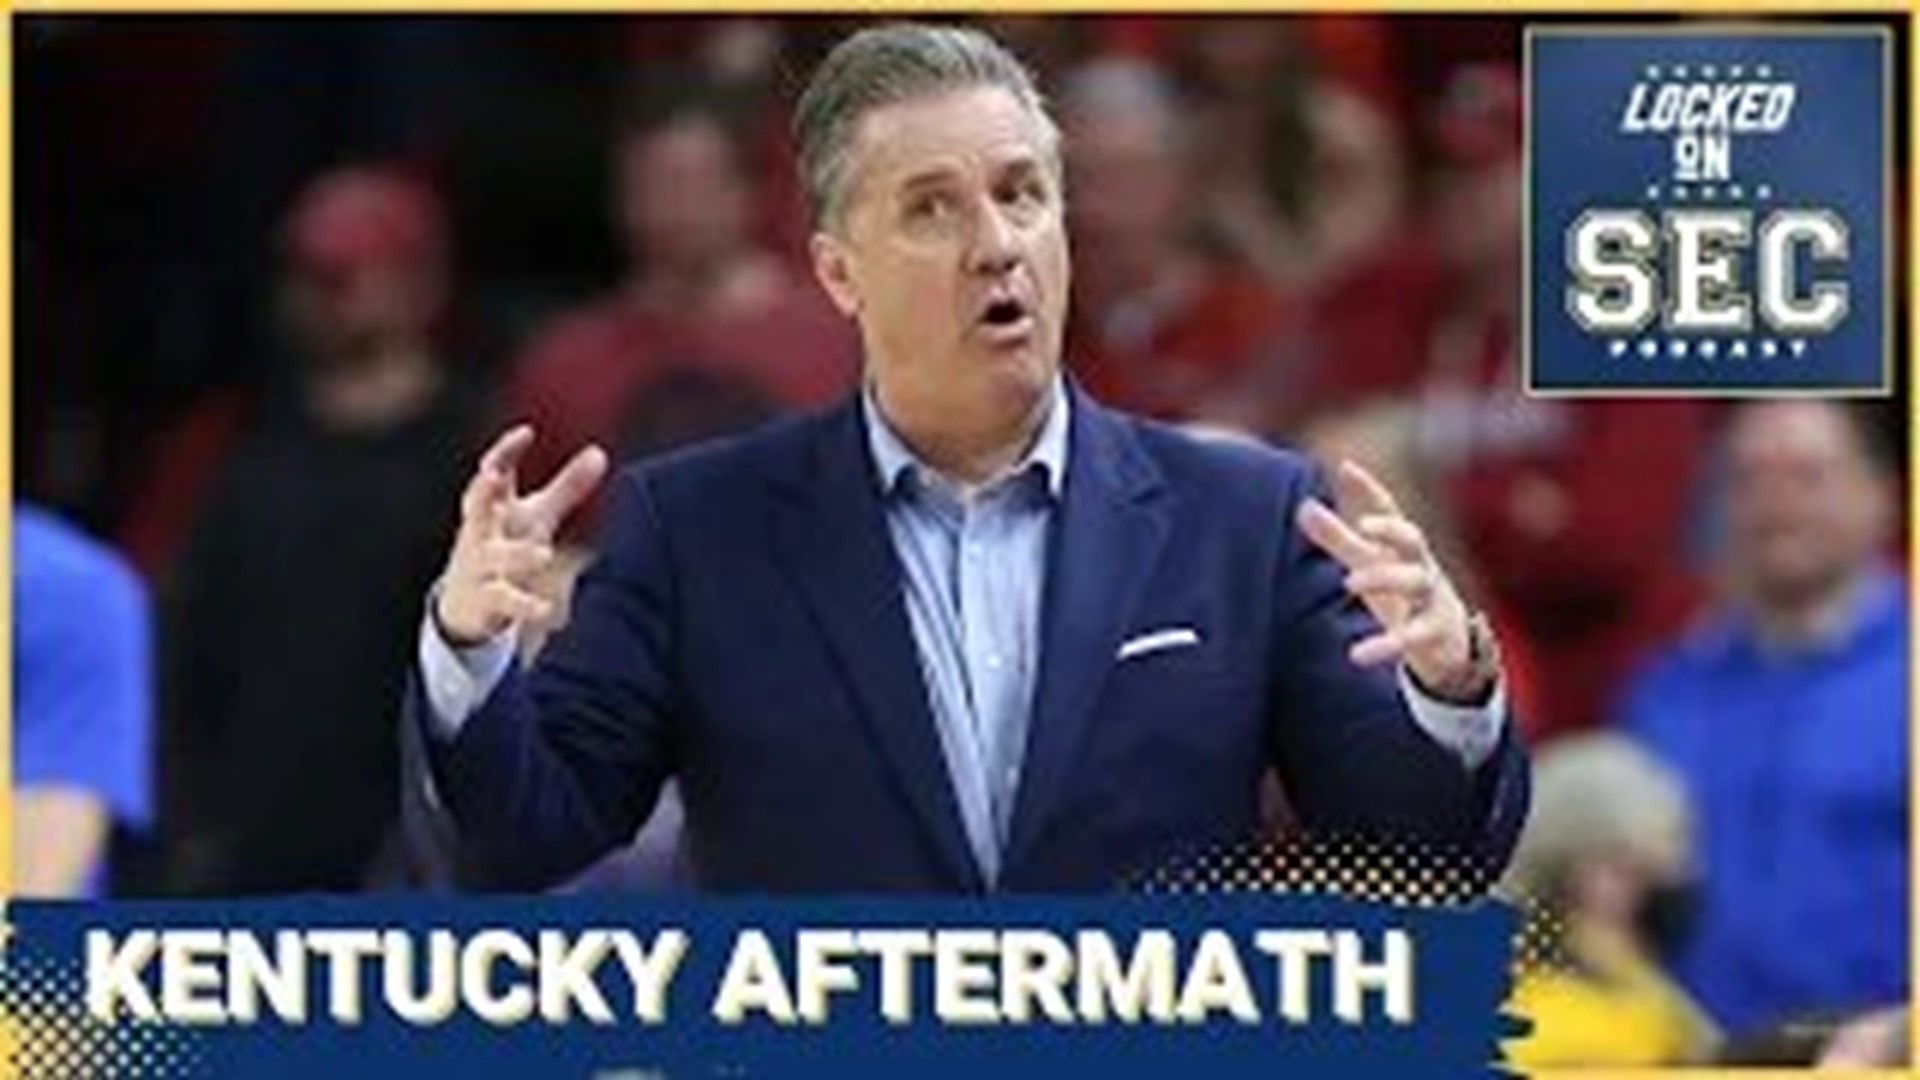 On today's show, we discuss the latest on the aftermath of John Calipari leaving Kentucky for Arkansas as we are joined by Tristan Pharis of KYinsider.com.